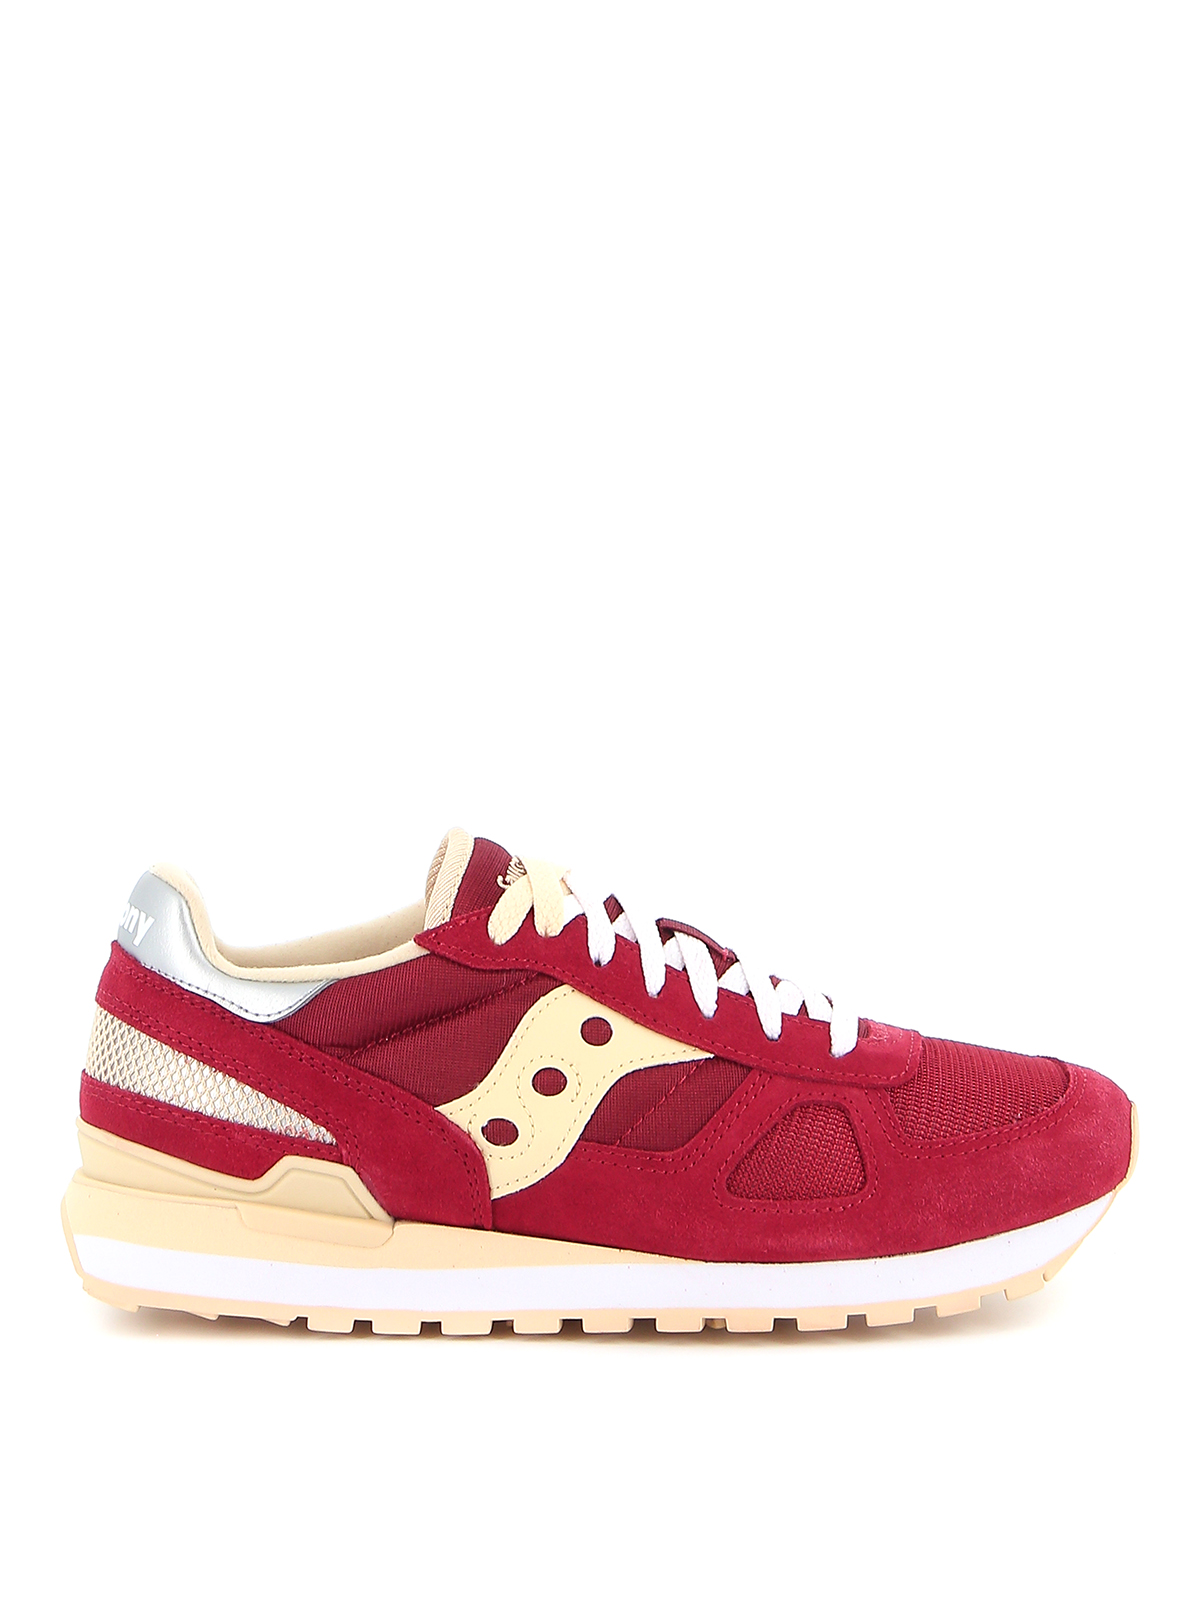 Trainers Saucony - Shadow Original red 